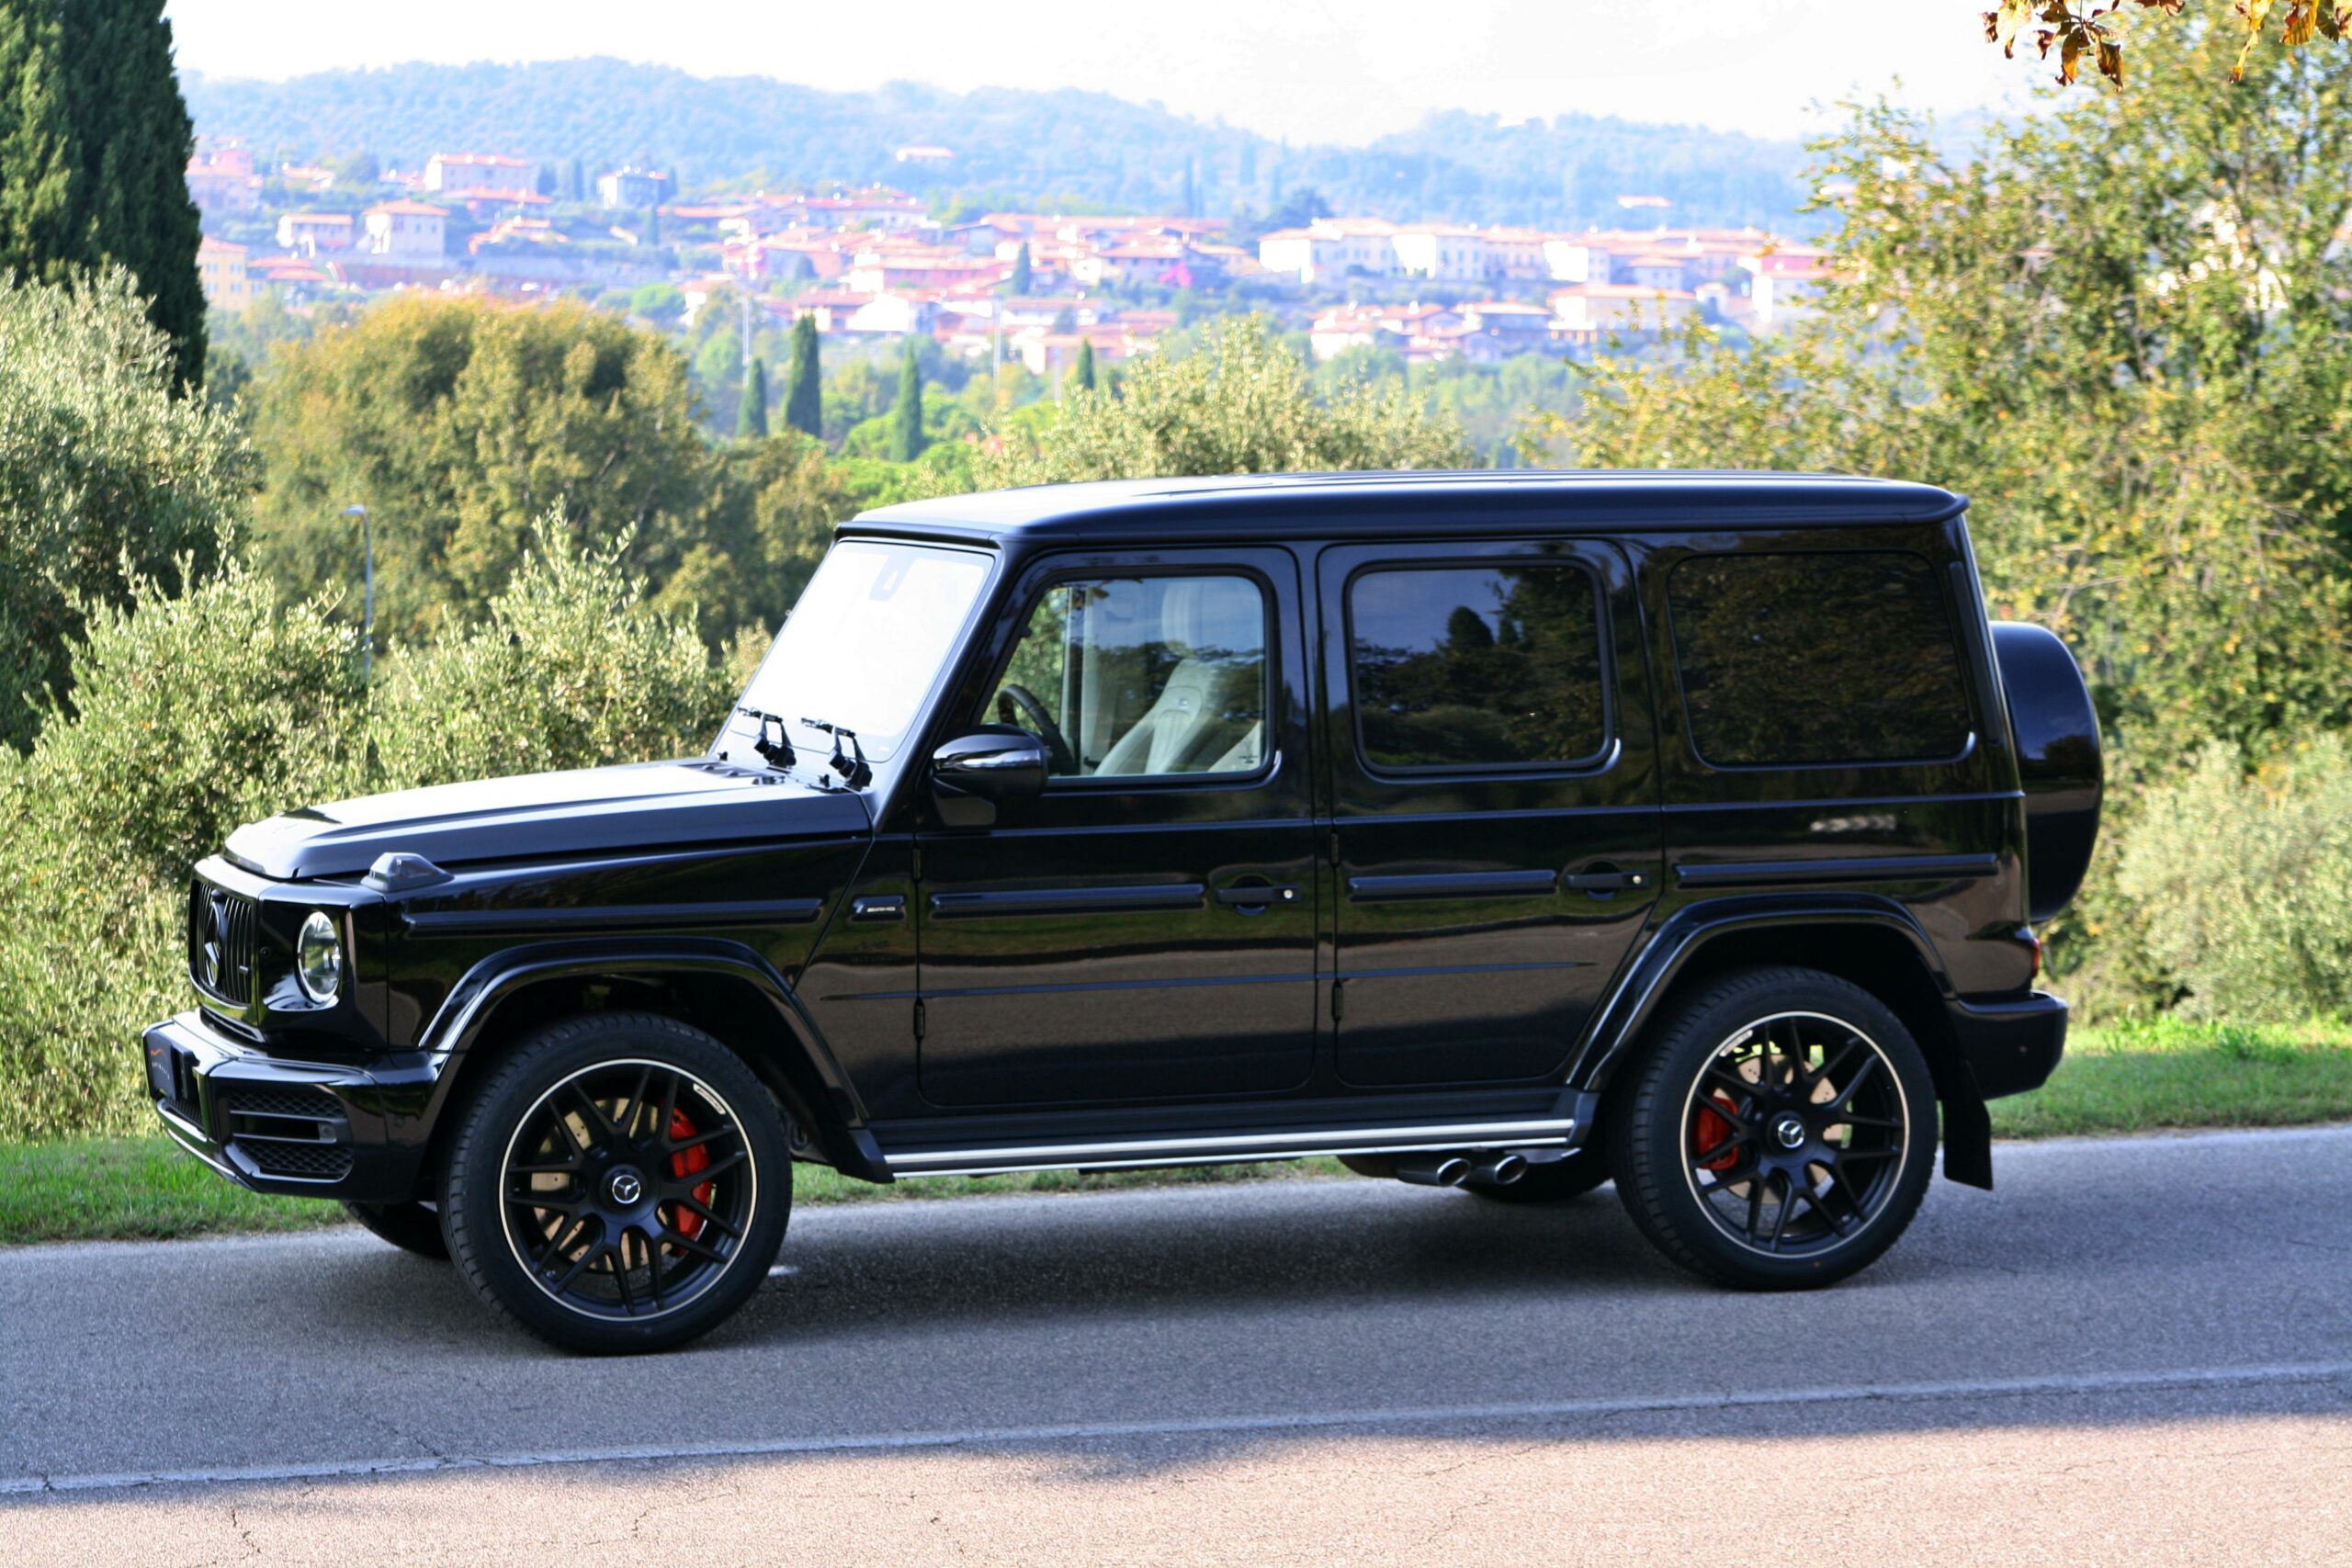 MERCEDES BENZ AMG G63 - Gallery img 03